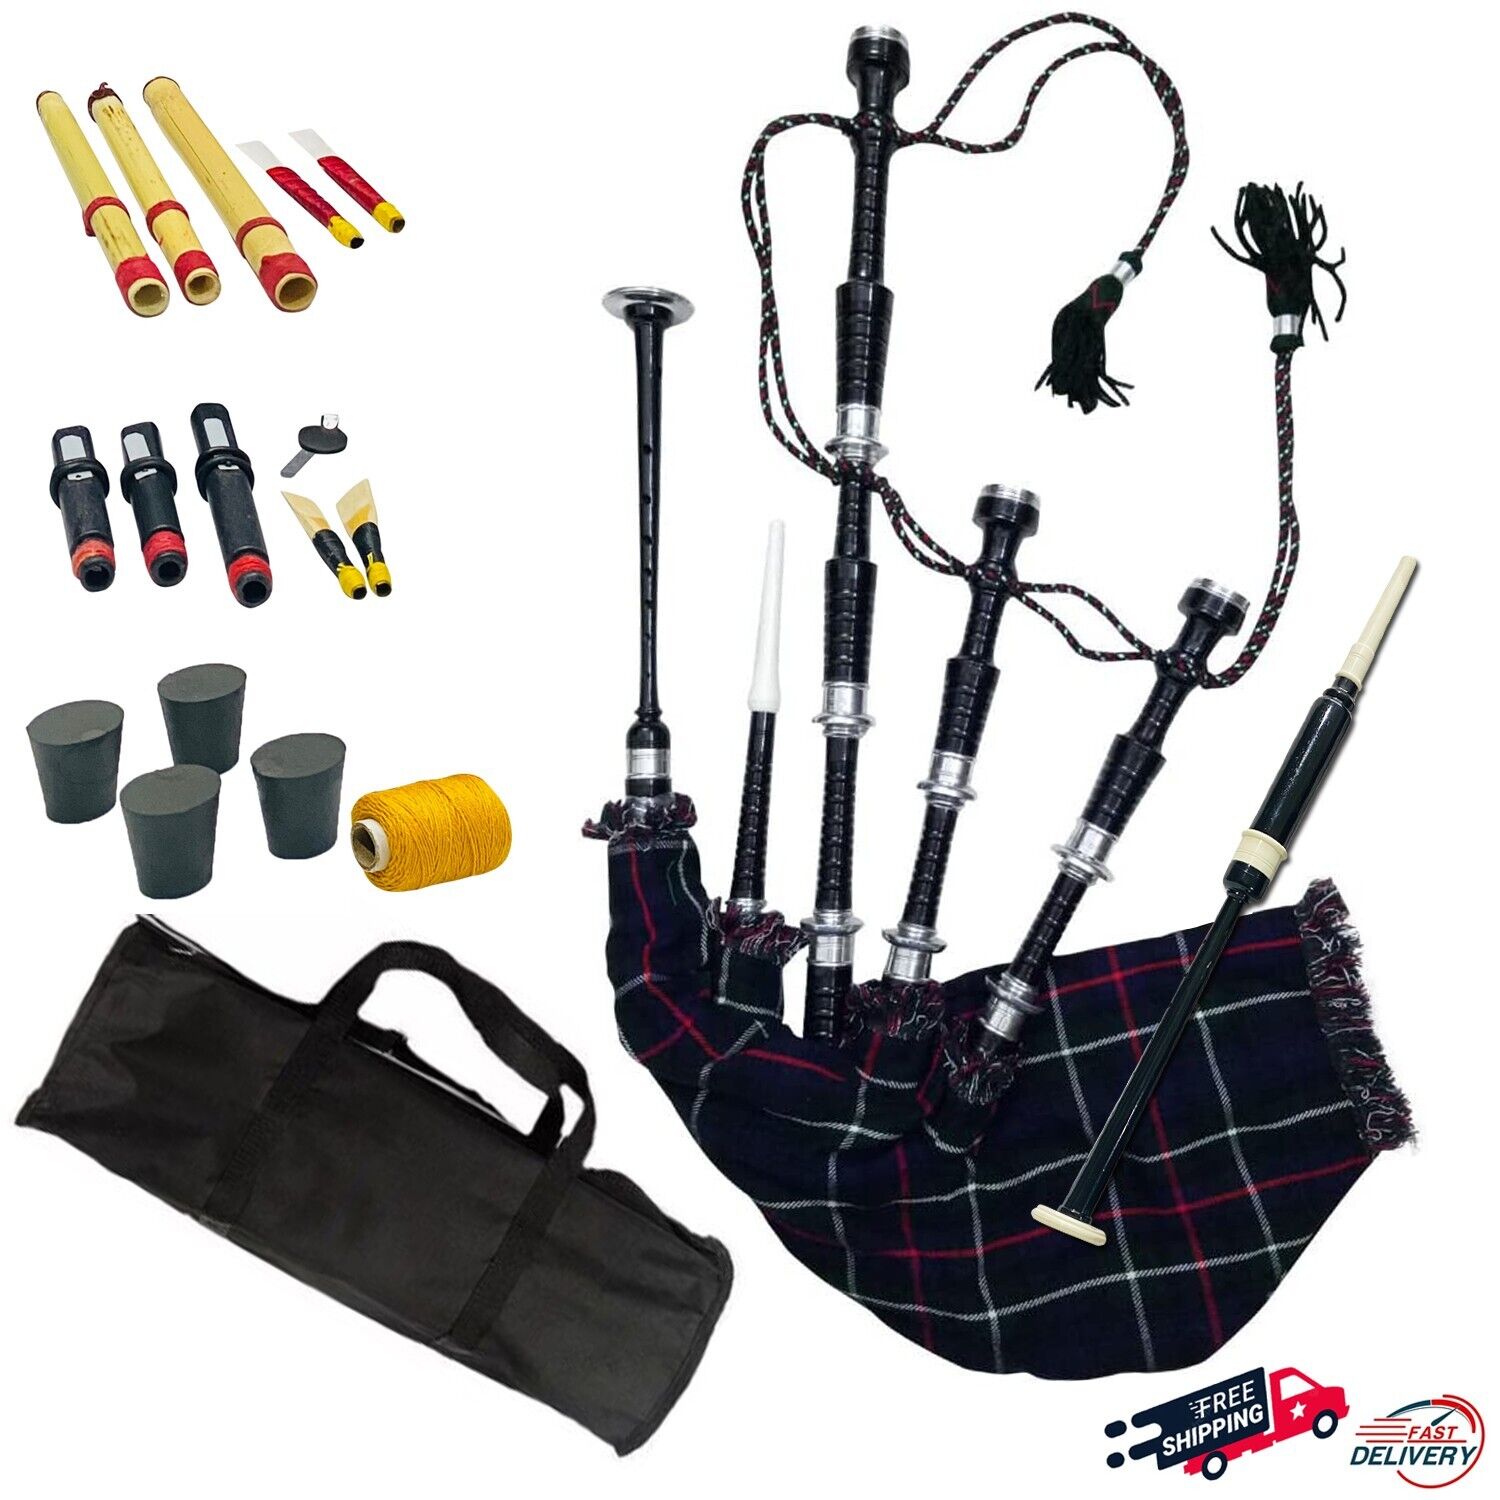 Scottish Highland Bagpipes Full Silver Mounts Mackenzie Cover With Bag&tutorbook